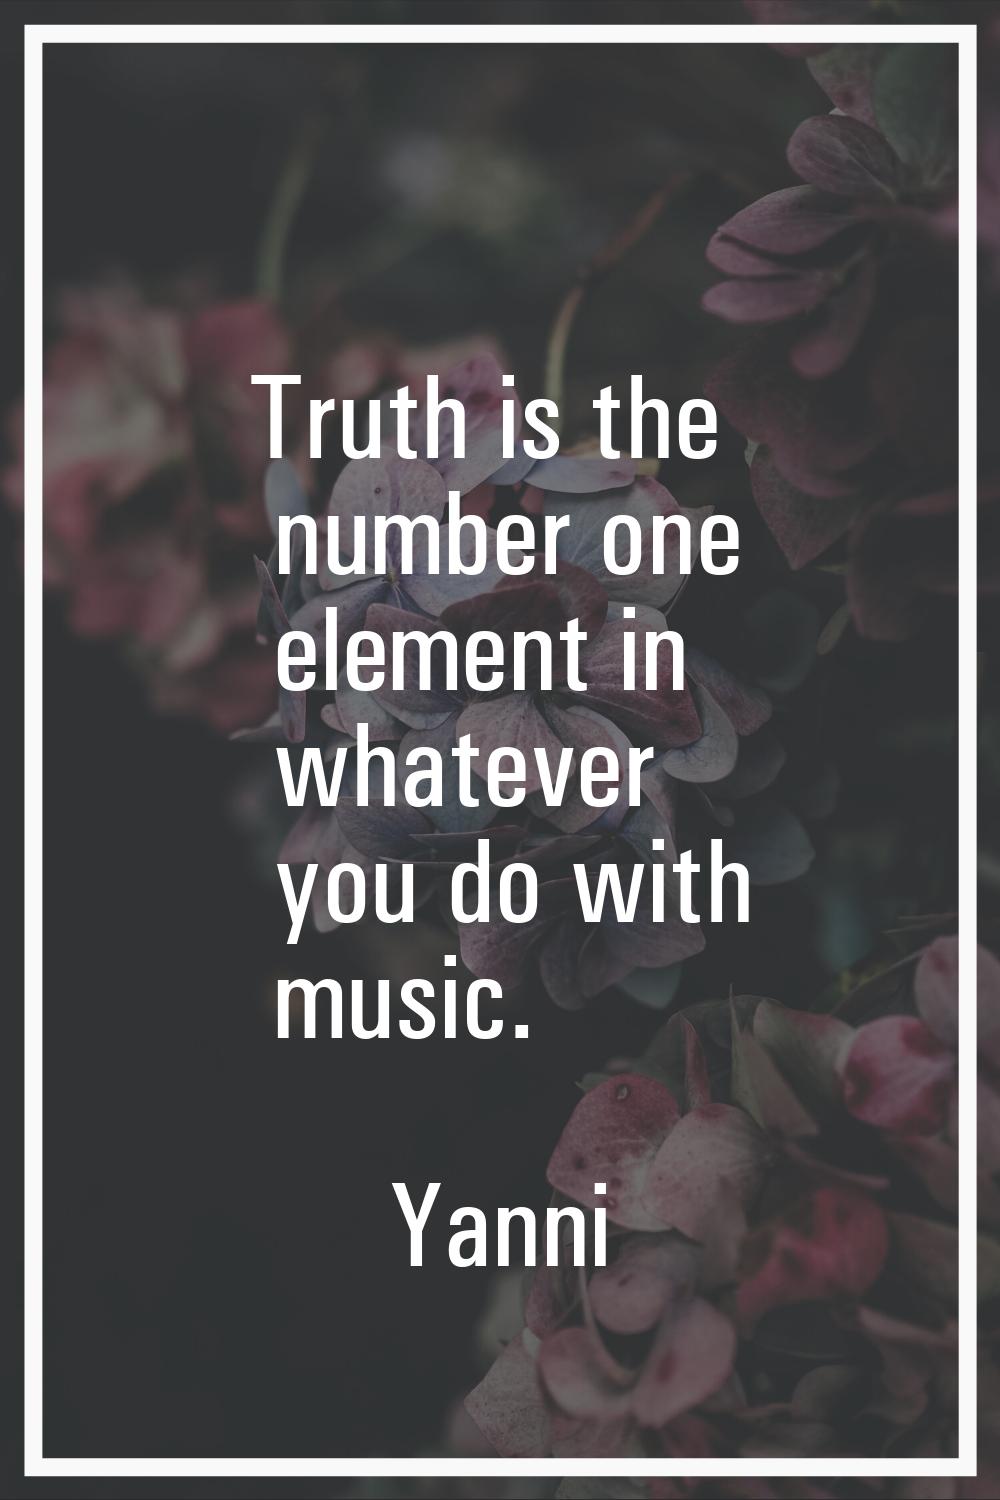 Truth is the number one element in whatever you do with music.